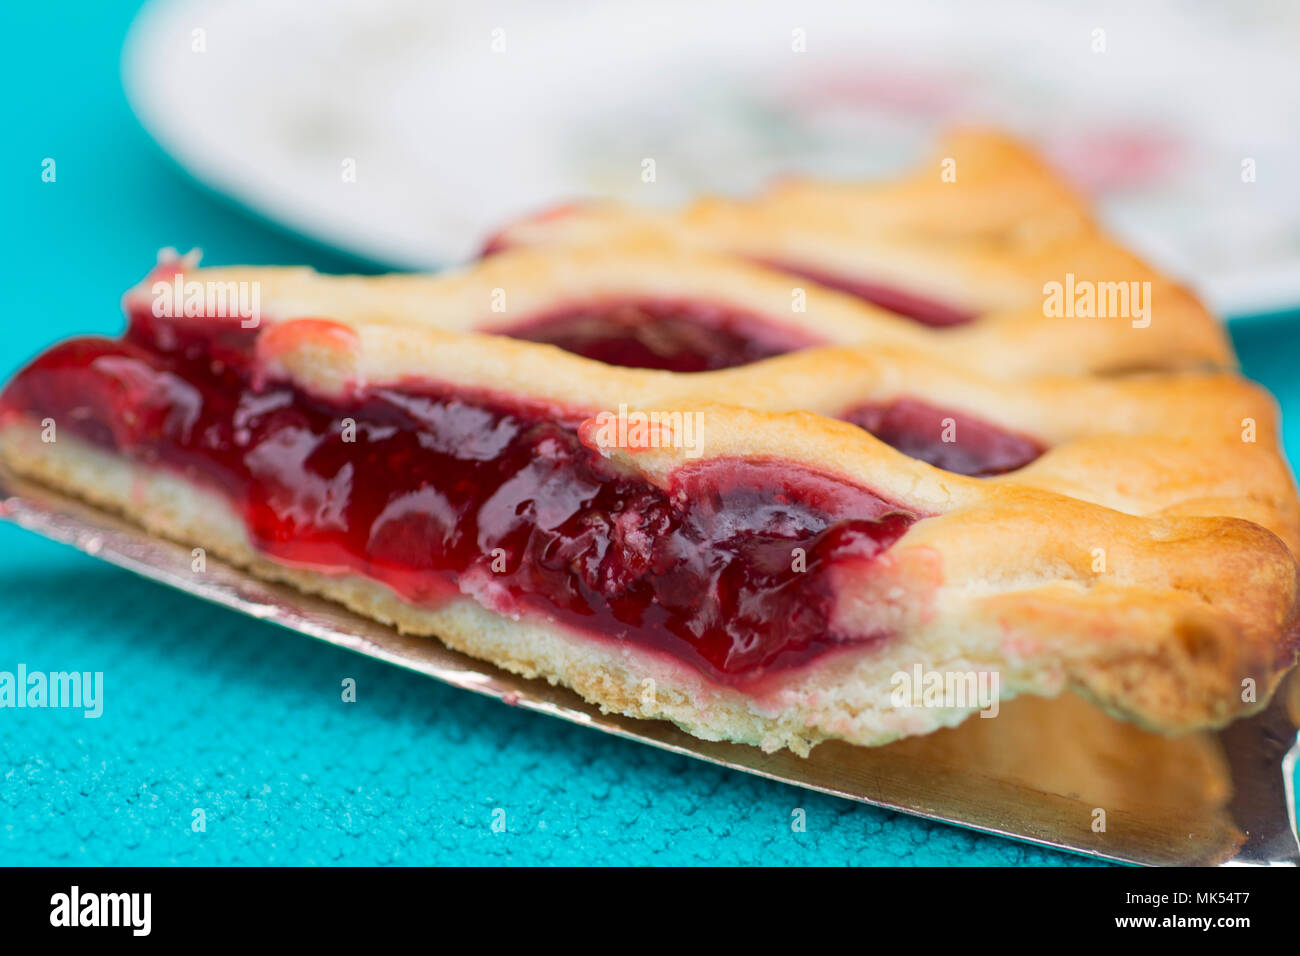 Pie, Strawberry Pie, Piece, Slice of Pie with Jelly Filling,Traditional American Stock Photo